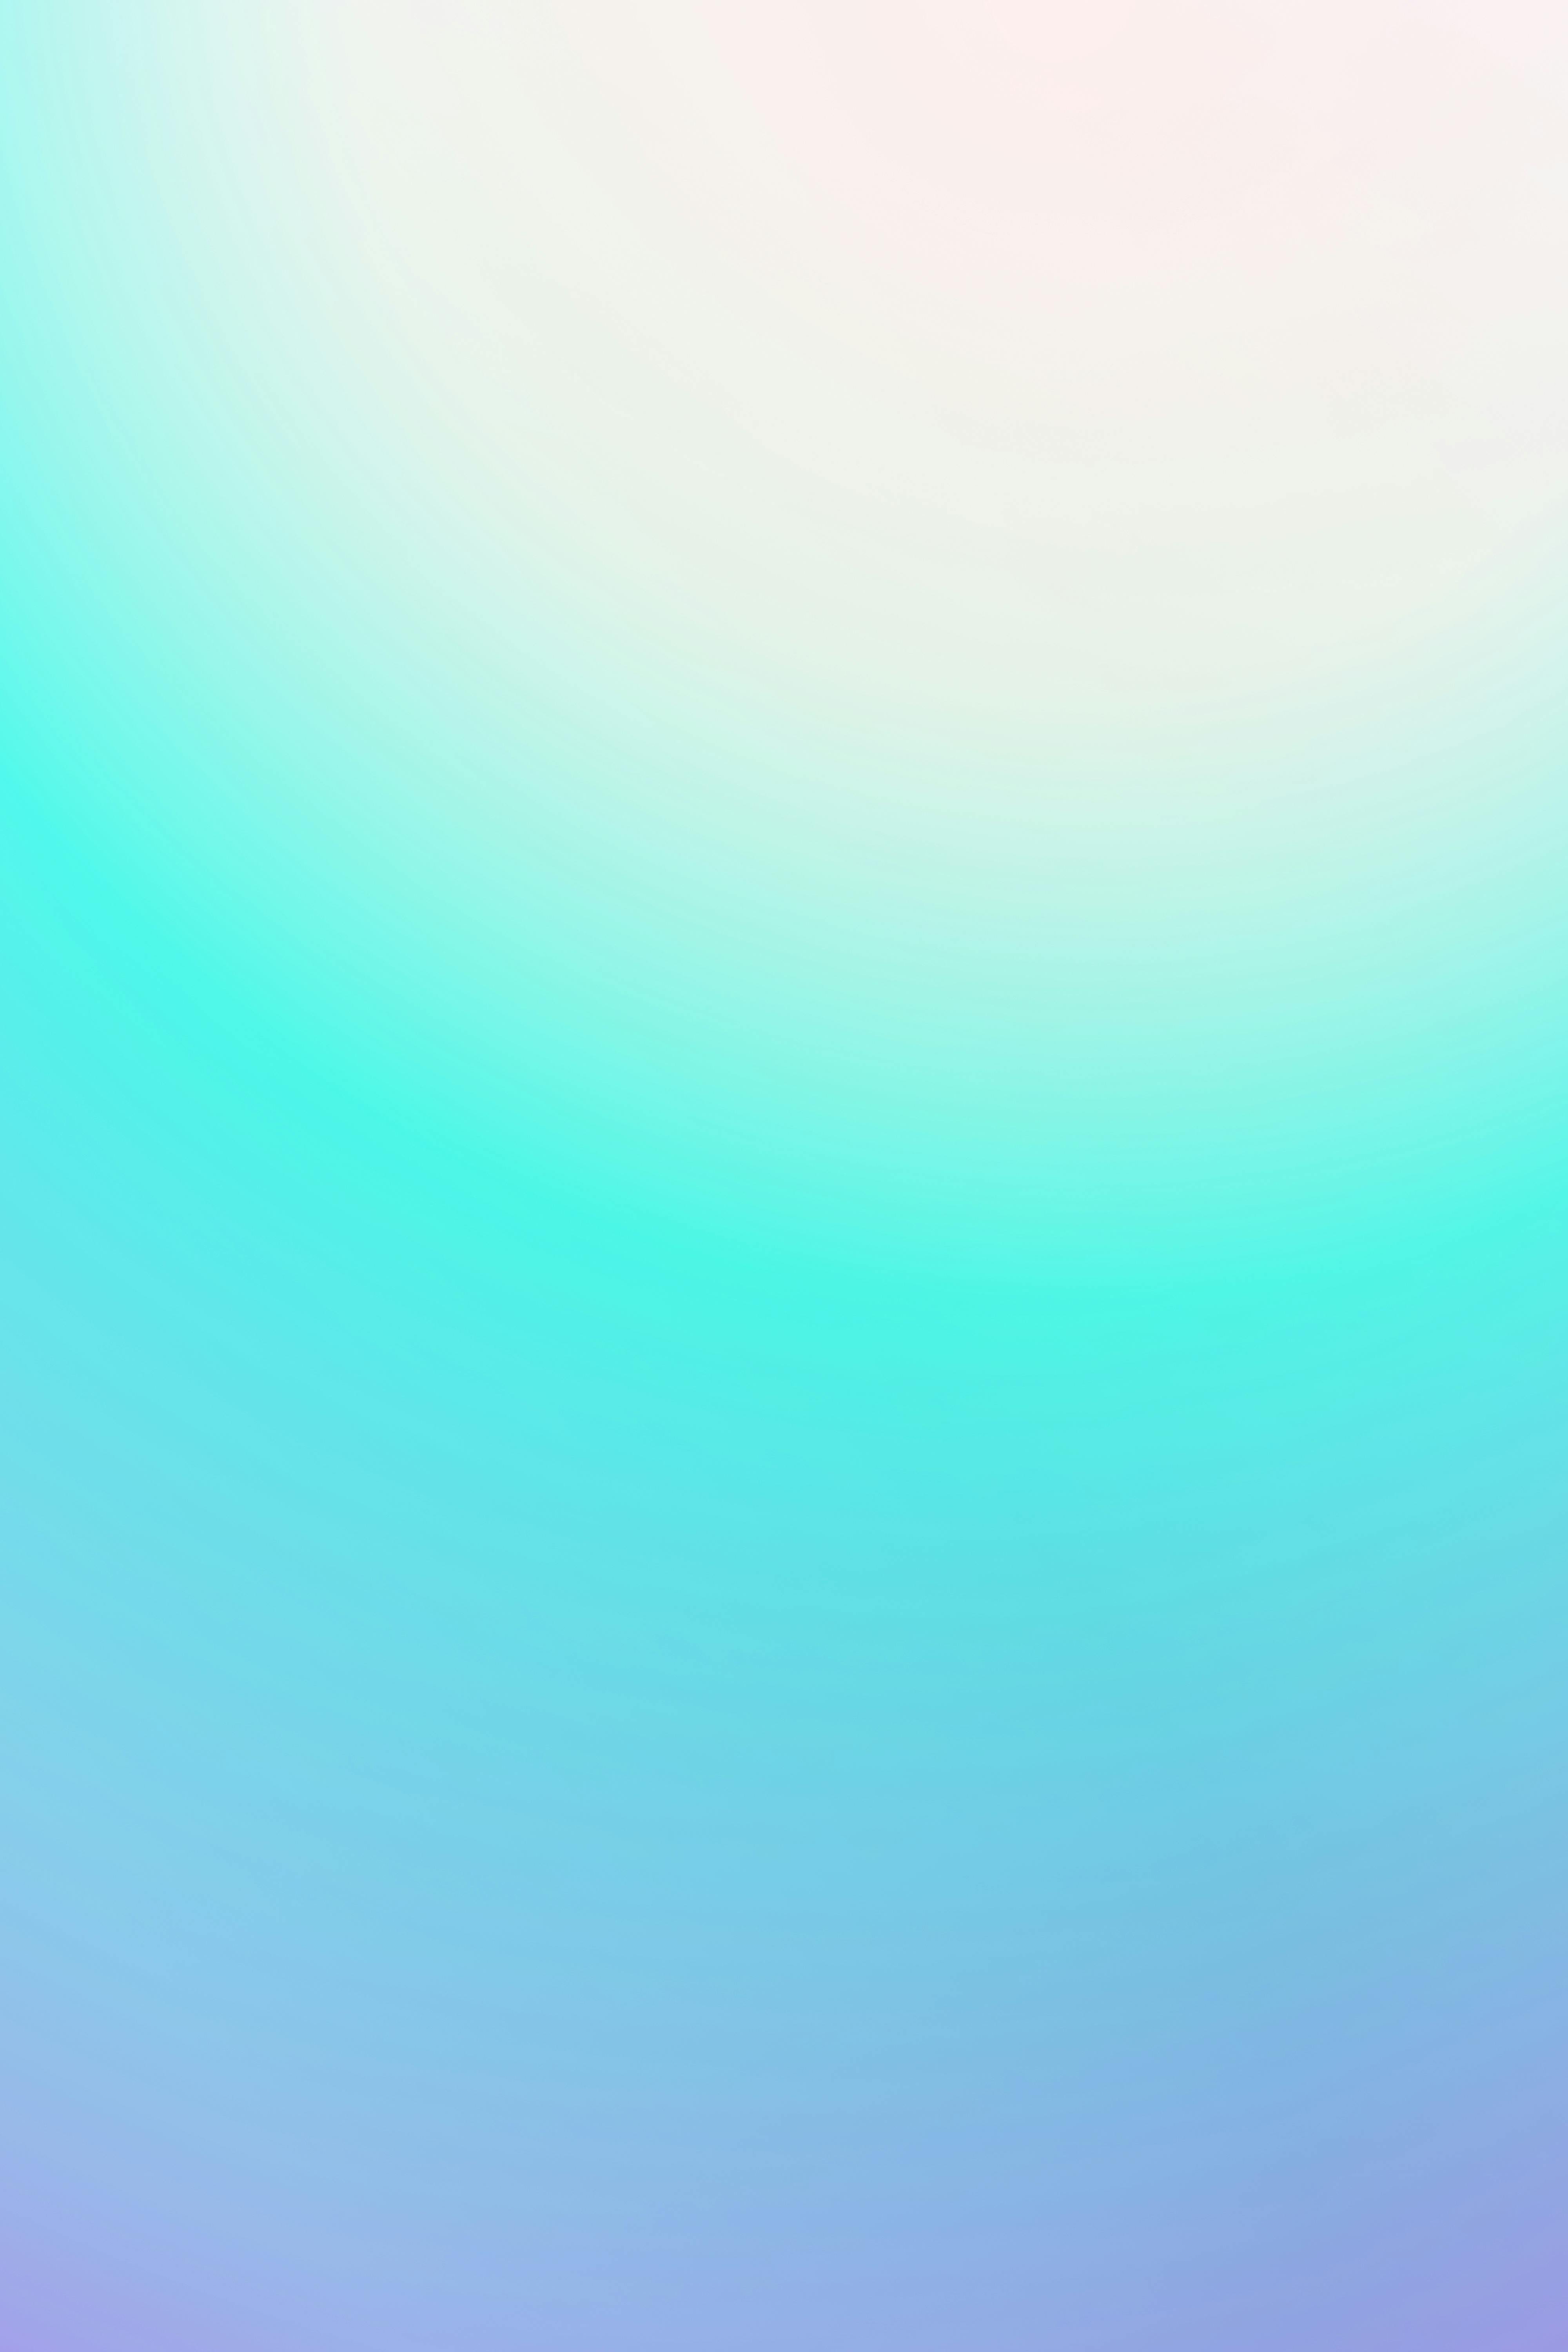 Bright blue lights on gradient background · Free Stock Photo